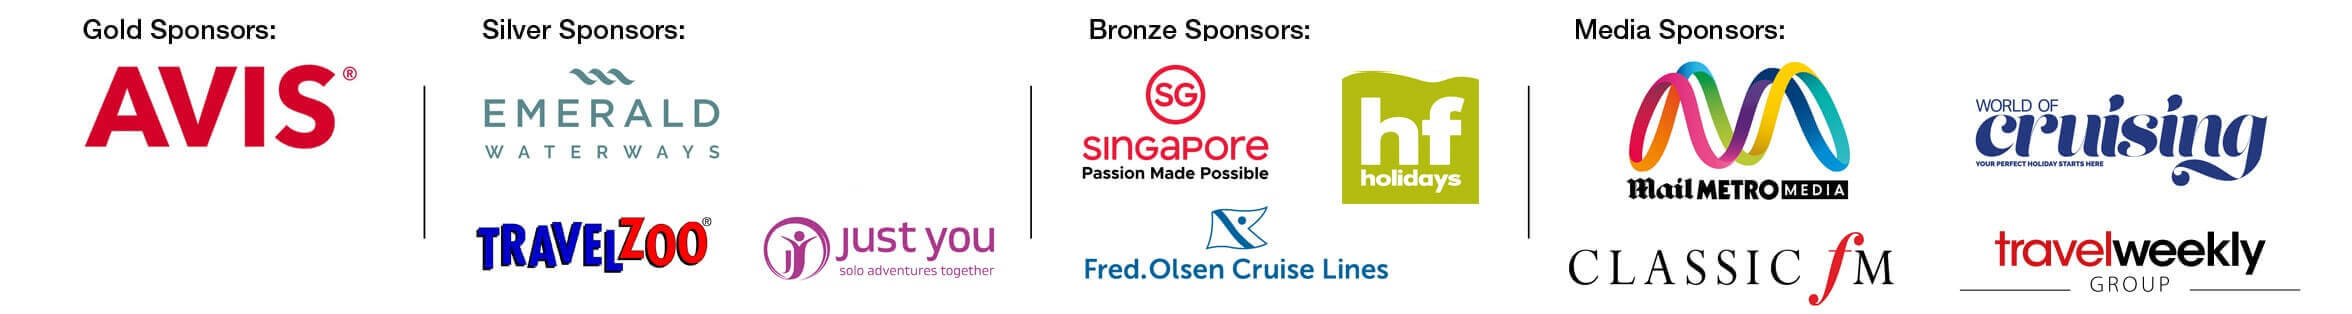 Our sponsors for the Silver Travel Awards 2020